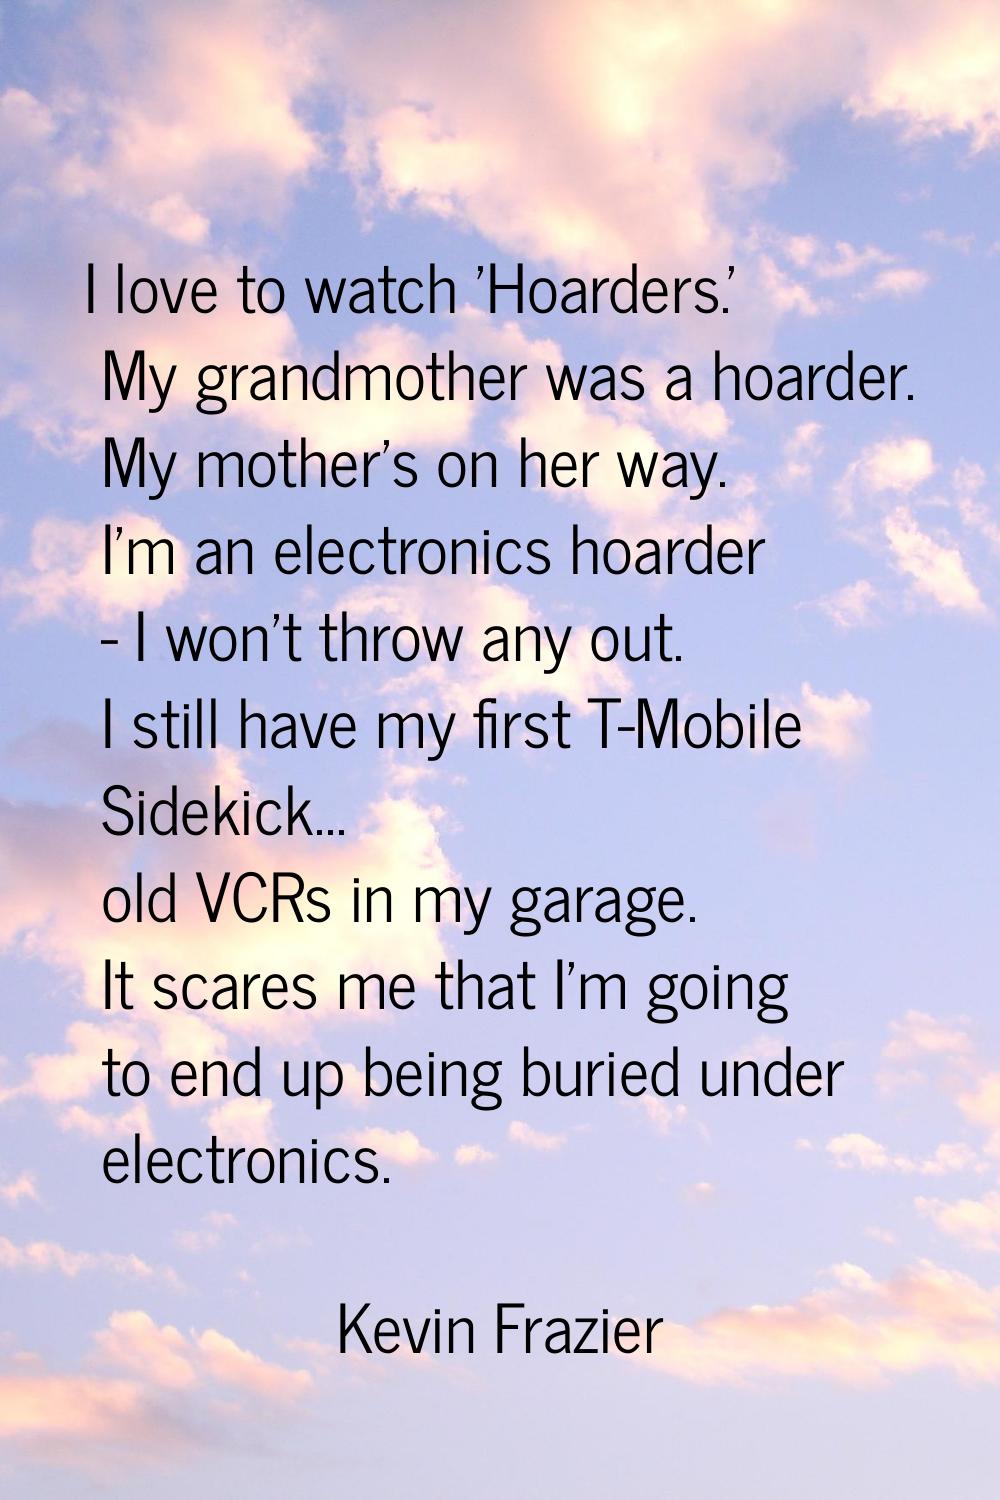 I love to watch 'Hoarders.' My grandmother was a hoarder. My mother's on her way. I'm an electronic